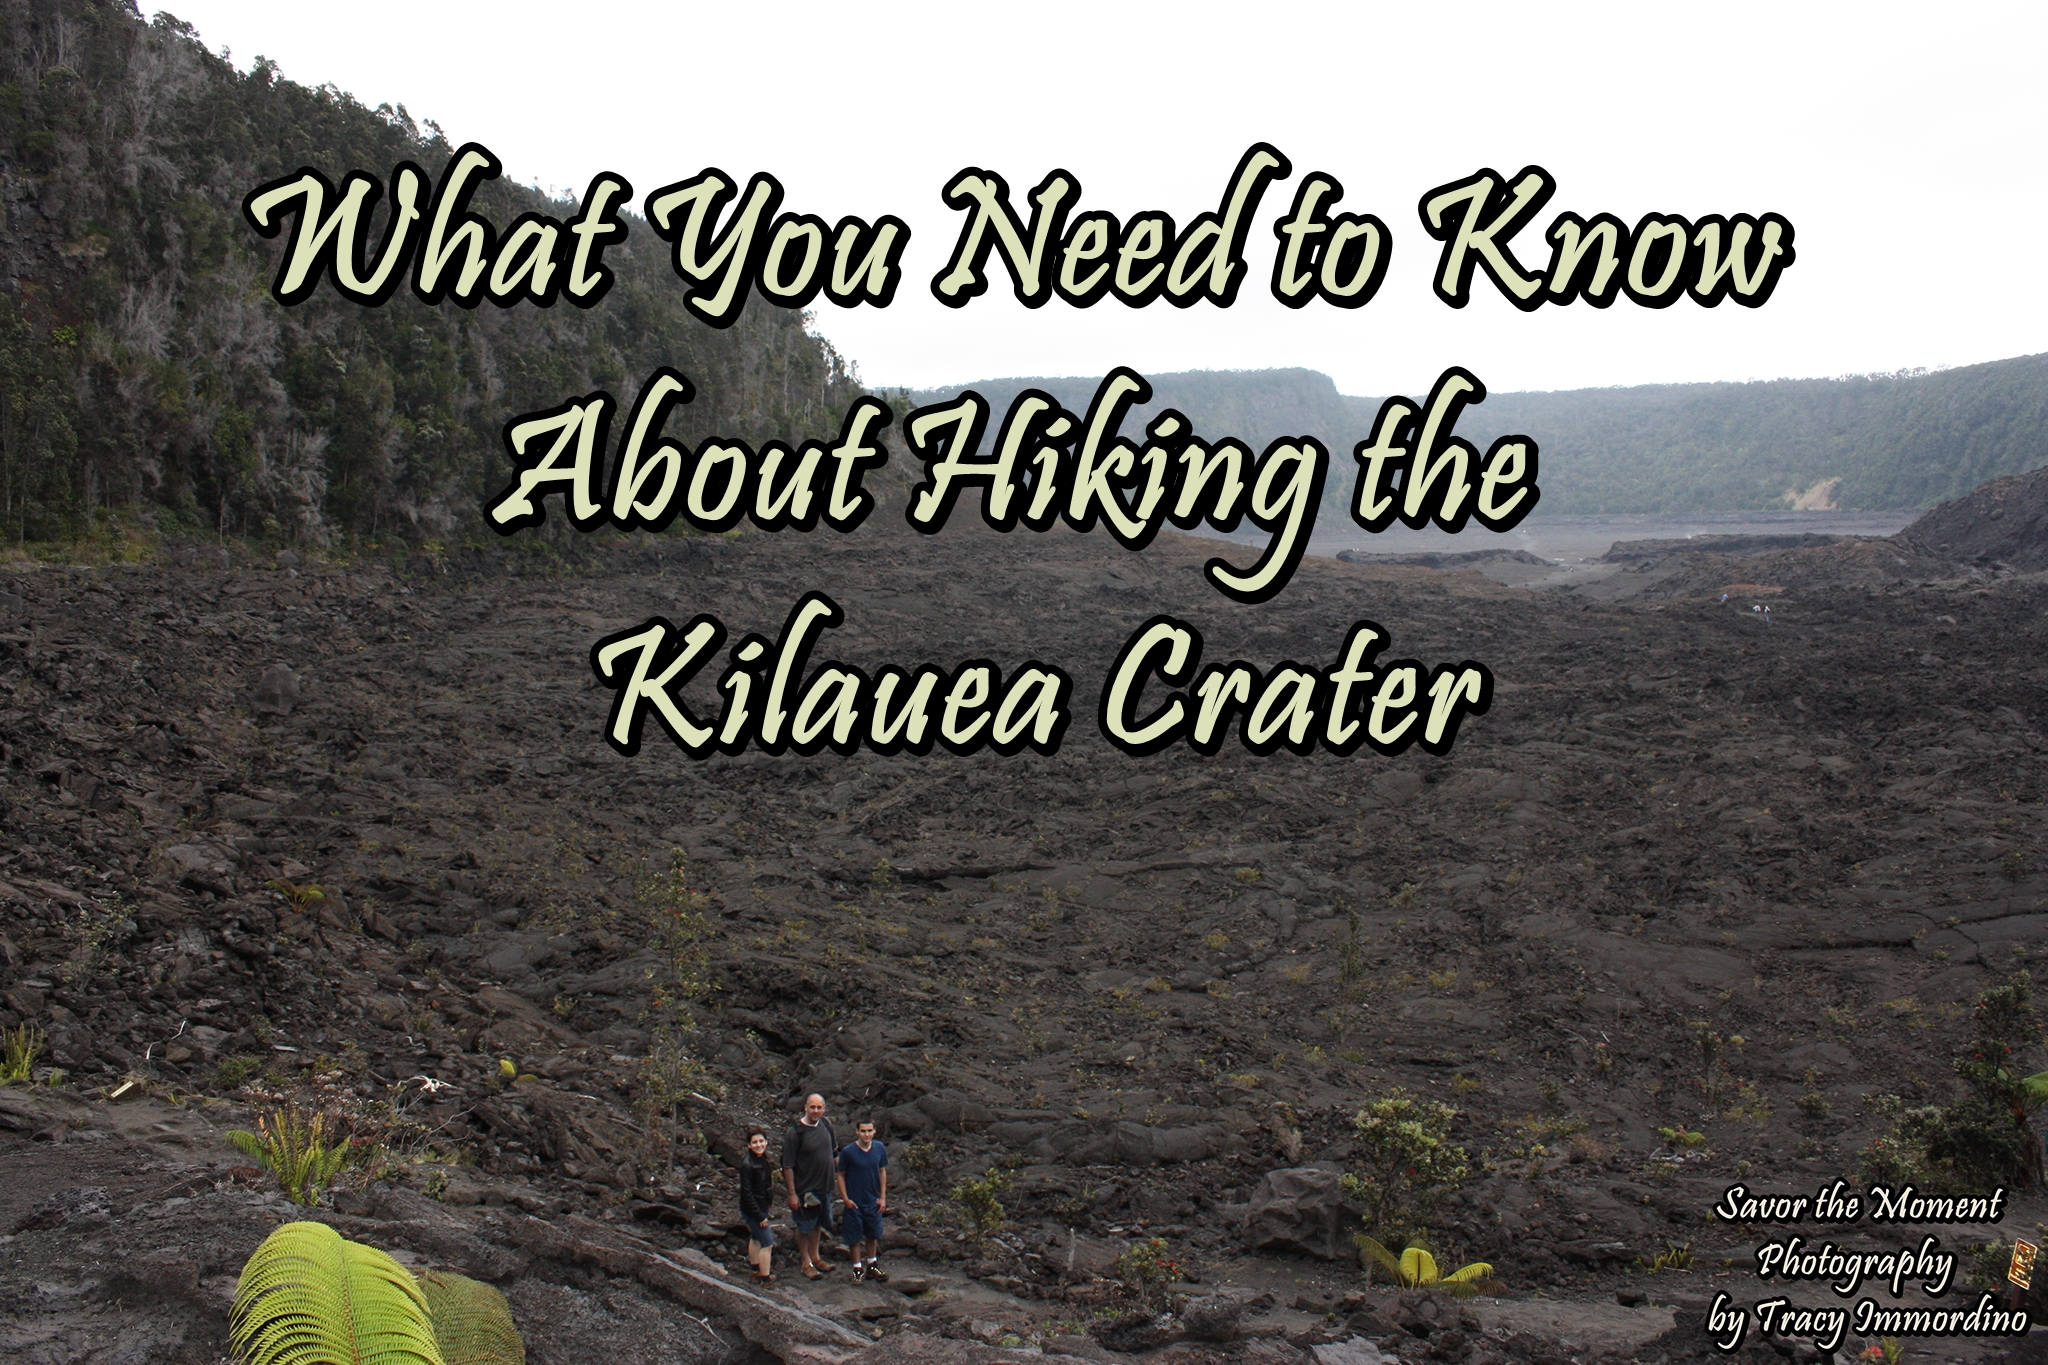 What You Need to Know About Hiking the Kilauea Crater